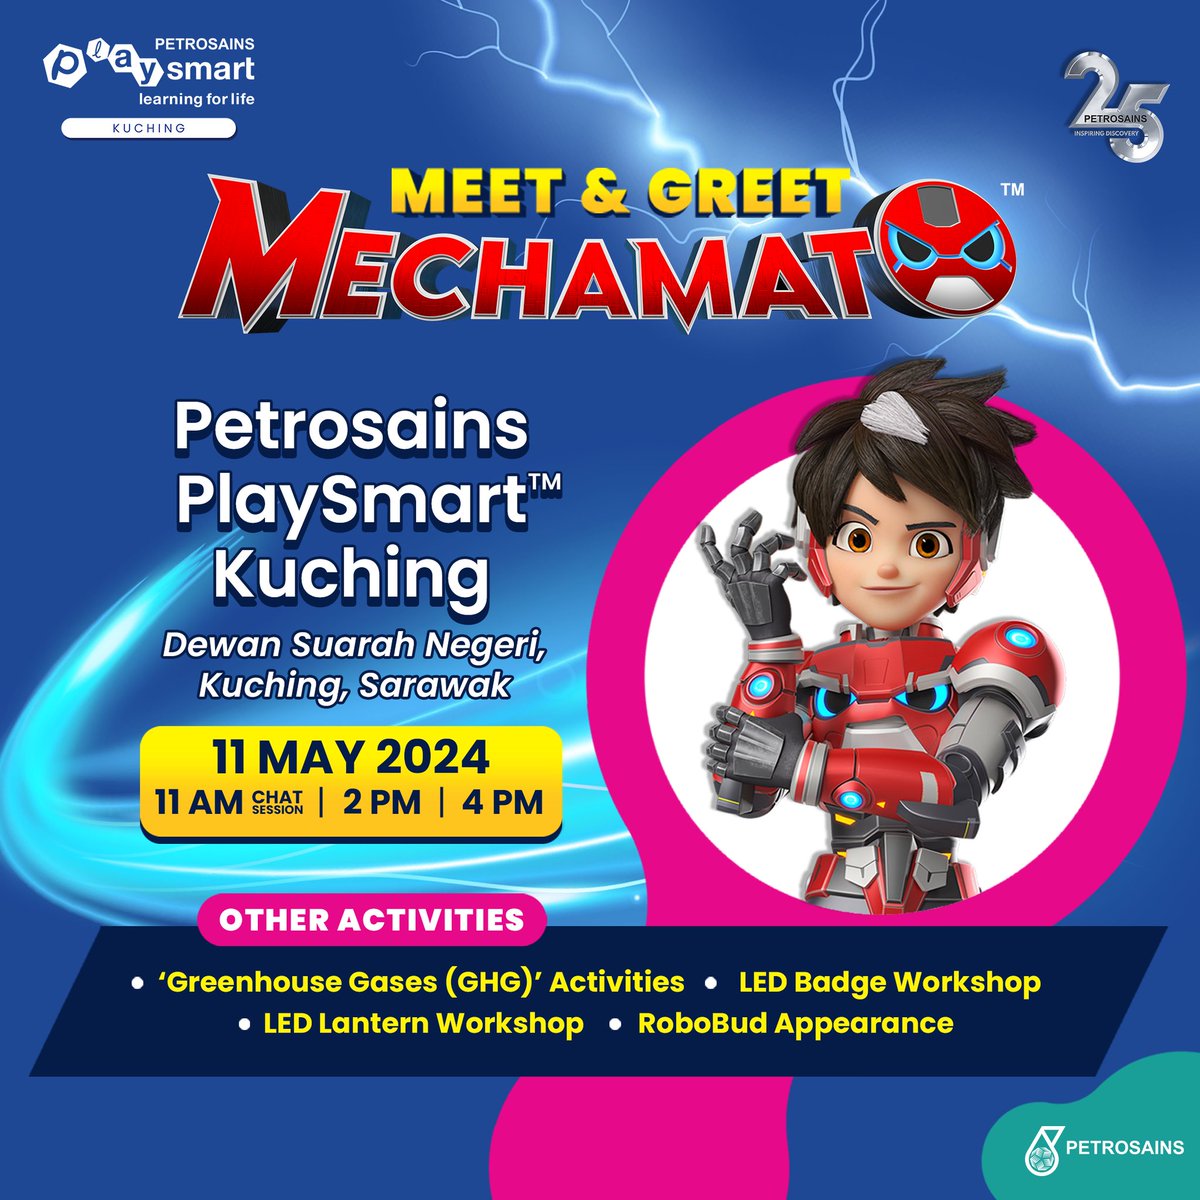 📢 GET MECHANIZED TODAY at #Petrosains PlaySmart Kuching, Dewan Suarah Negeri! It's going to be a supercharged day of learning and fun‼️🤖

➡️Meet & Greet session with #Mechamato!
➡️Build your own LED Badge and Lantern!
➡️Special appearance of RoboBud and many more!